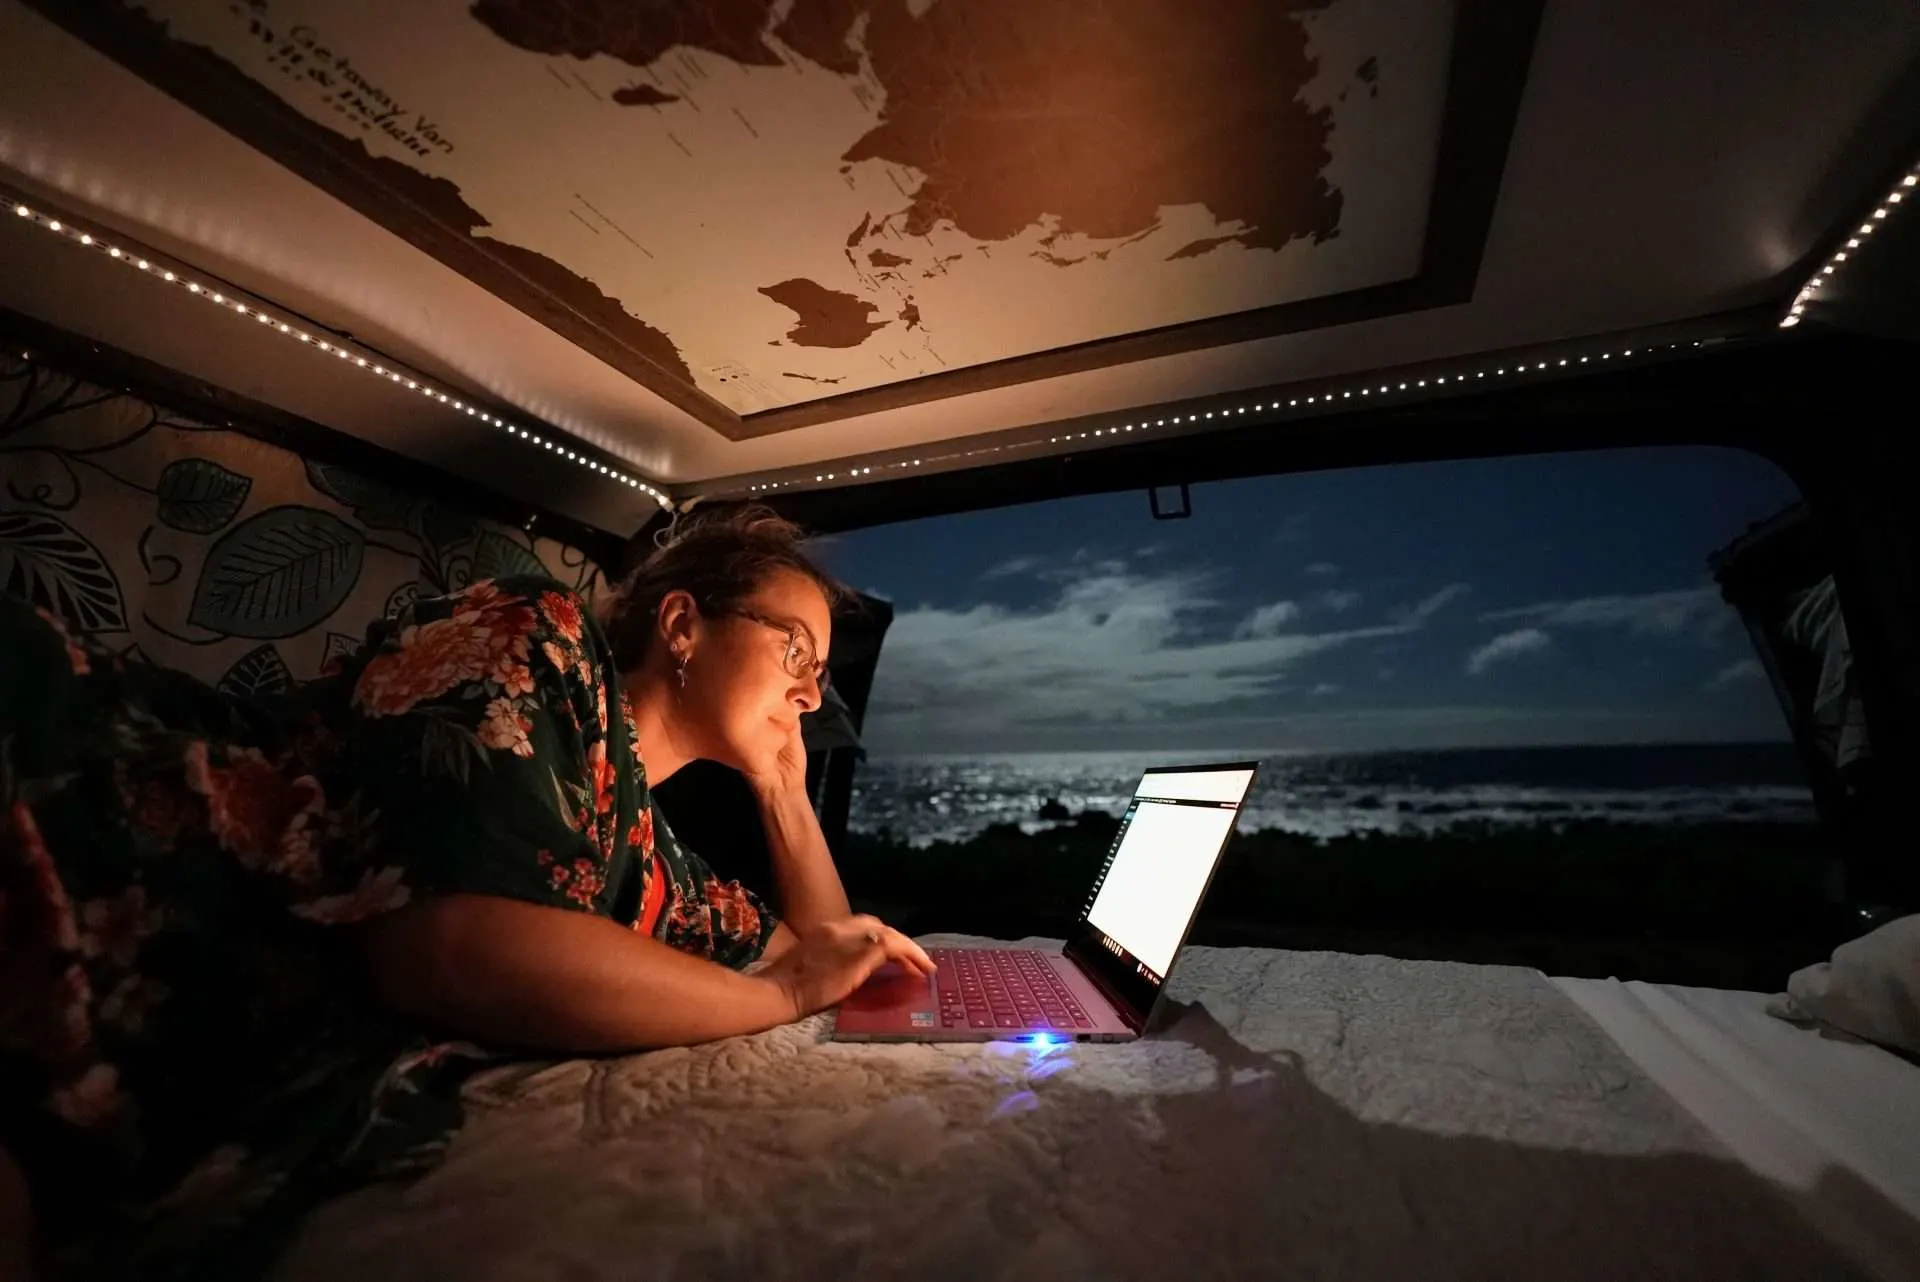 cait morton working on computer in camper van on the beach